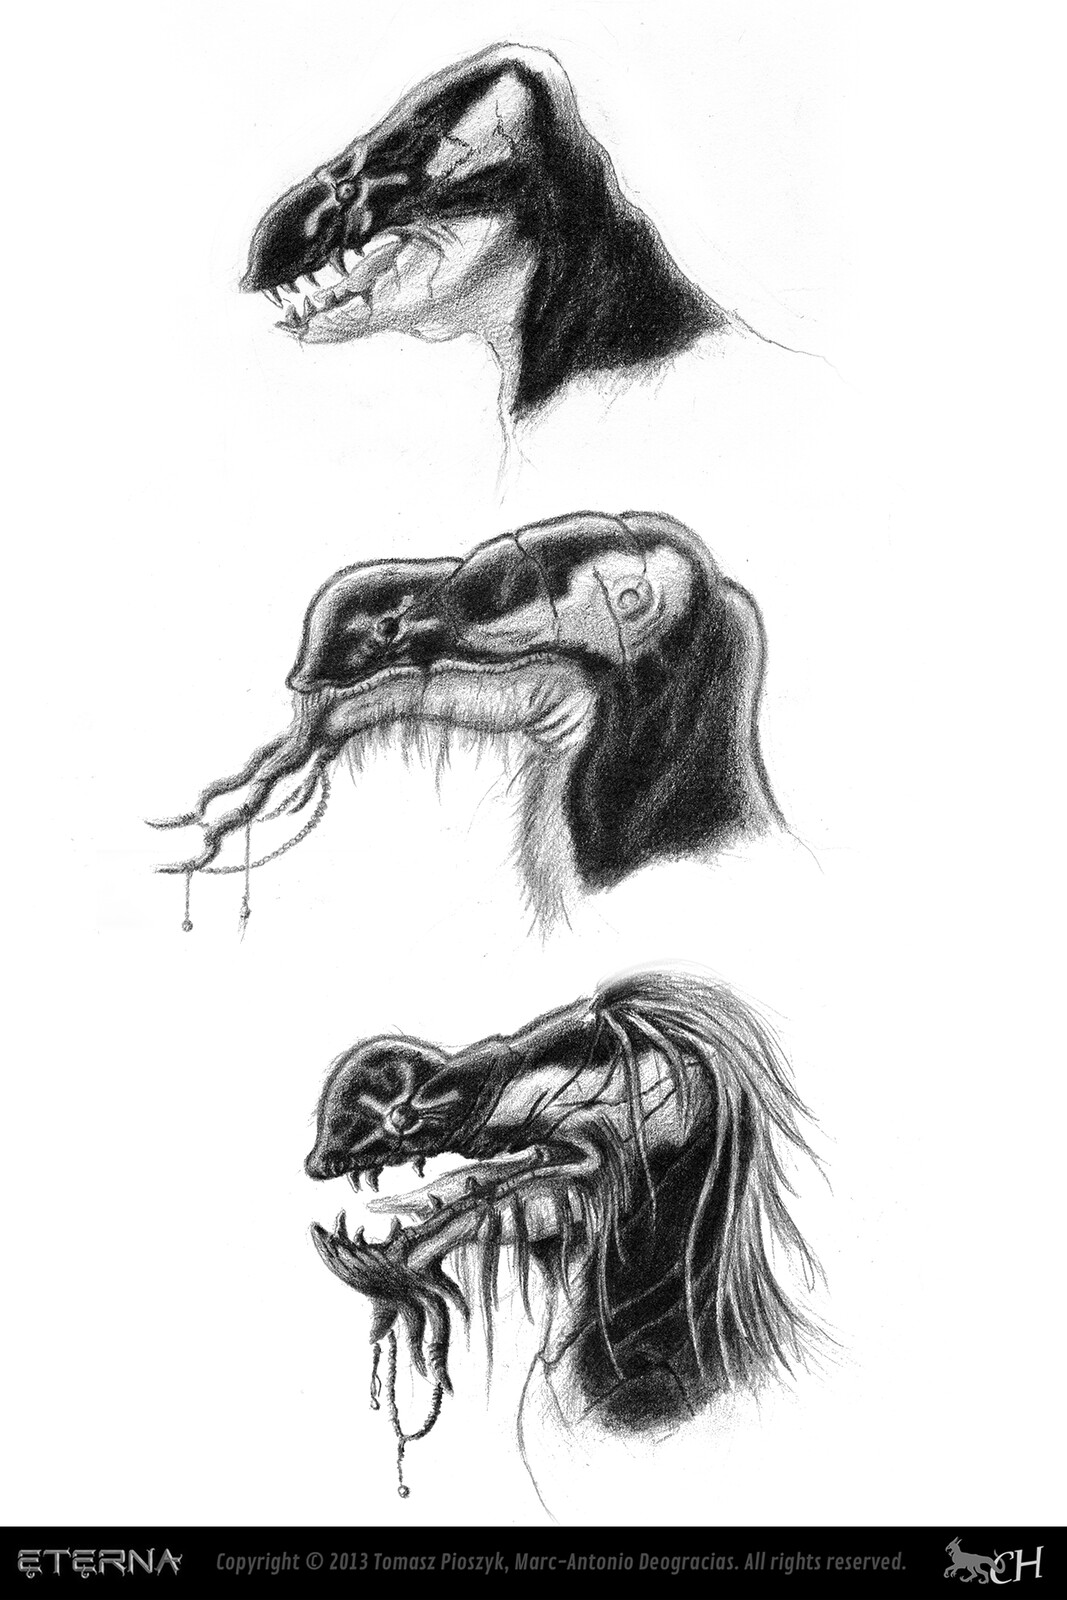 Conceptual Sketches of the Nakalun's head. Belonging to the Baleen race, the Nakalun is a prominent character and antagonist in the Eterna series. 